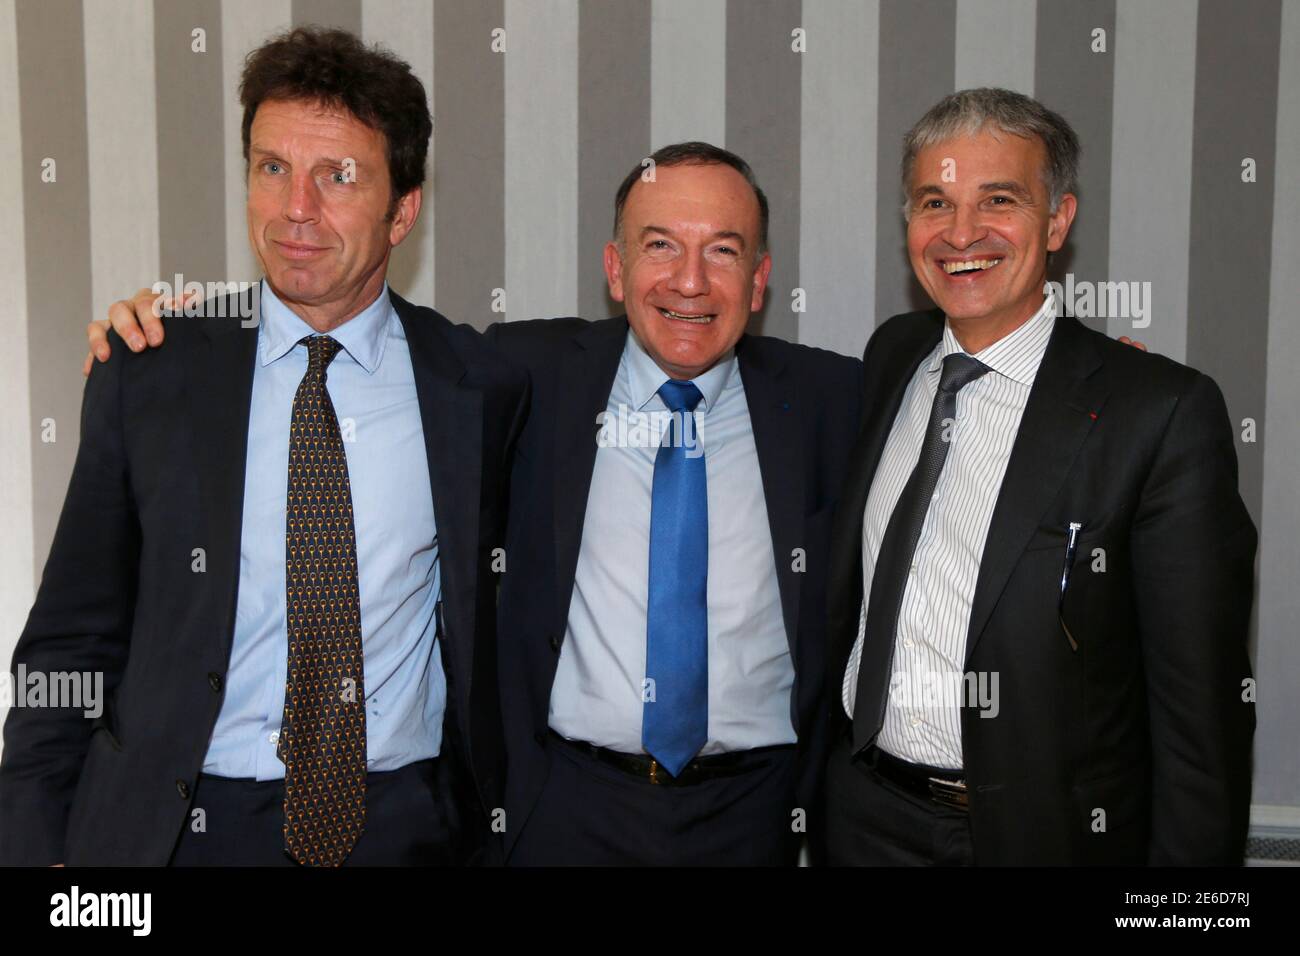 Pierre Gattaz (C), Chief executive of large, family-owned connectors  company Radiall, Omea Telecom Chief Executive Officer Geoffroy Roux de  Bezieux (L) and French businessman Patrick Bernasconi pose for the media  after a